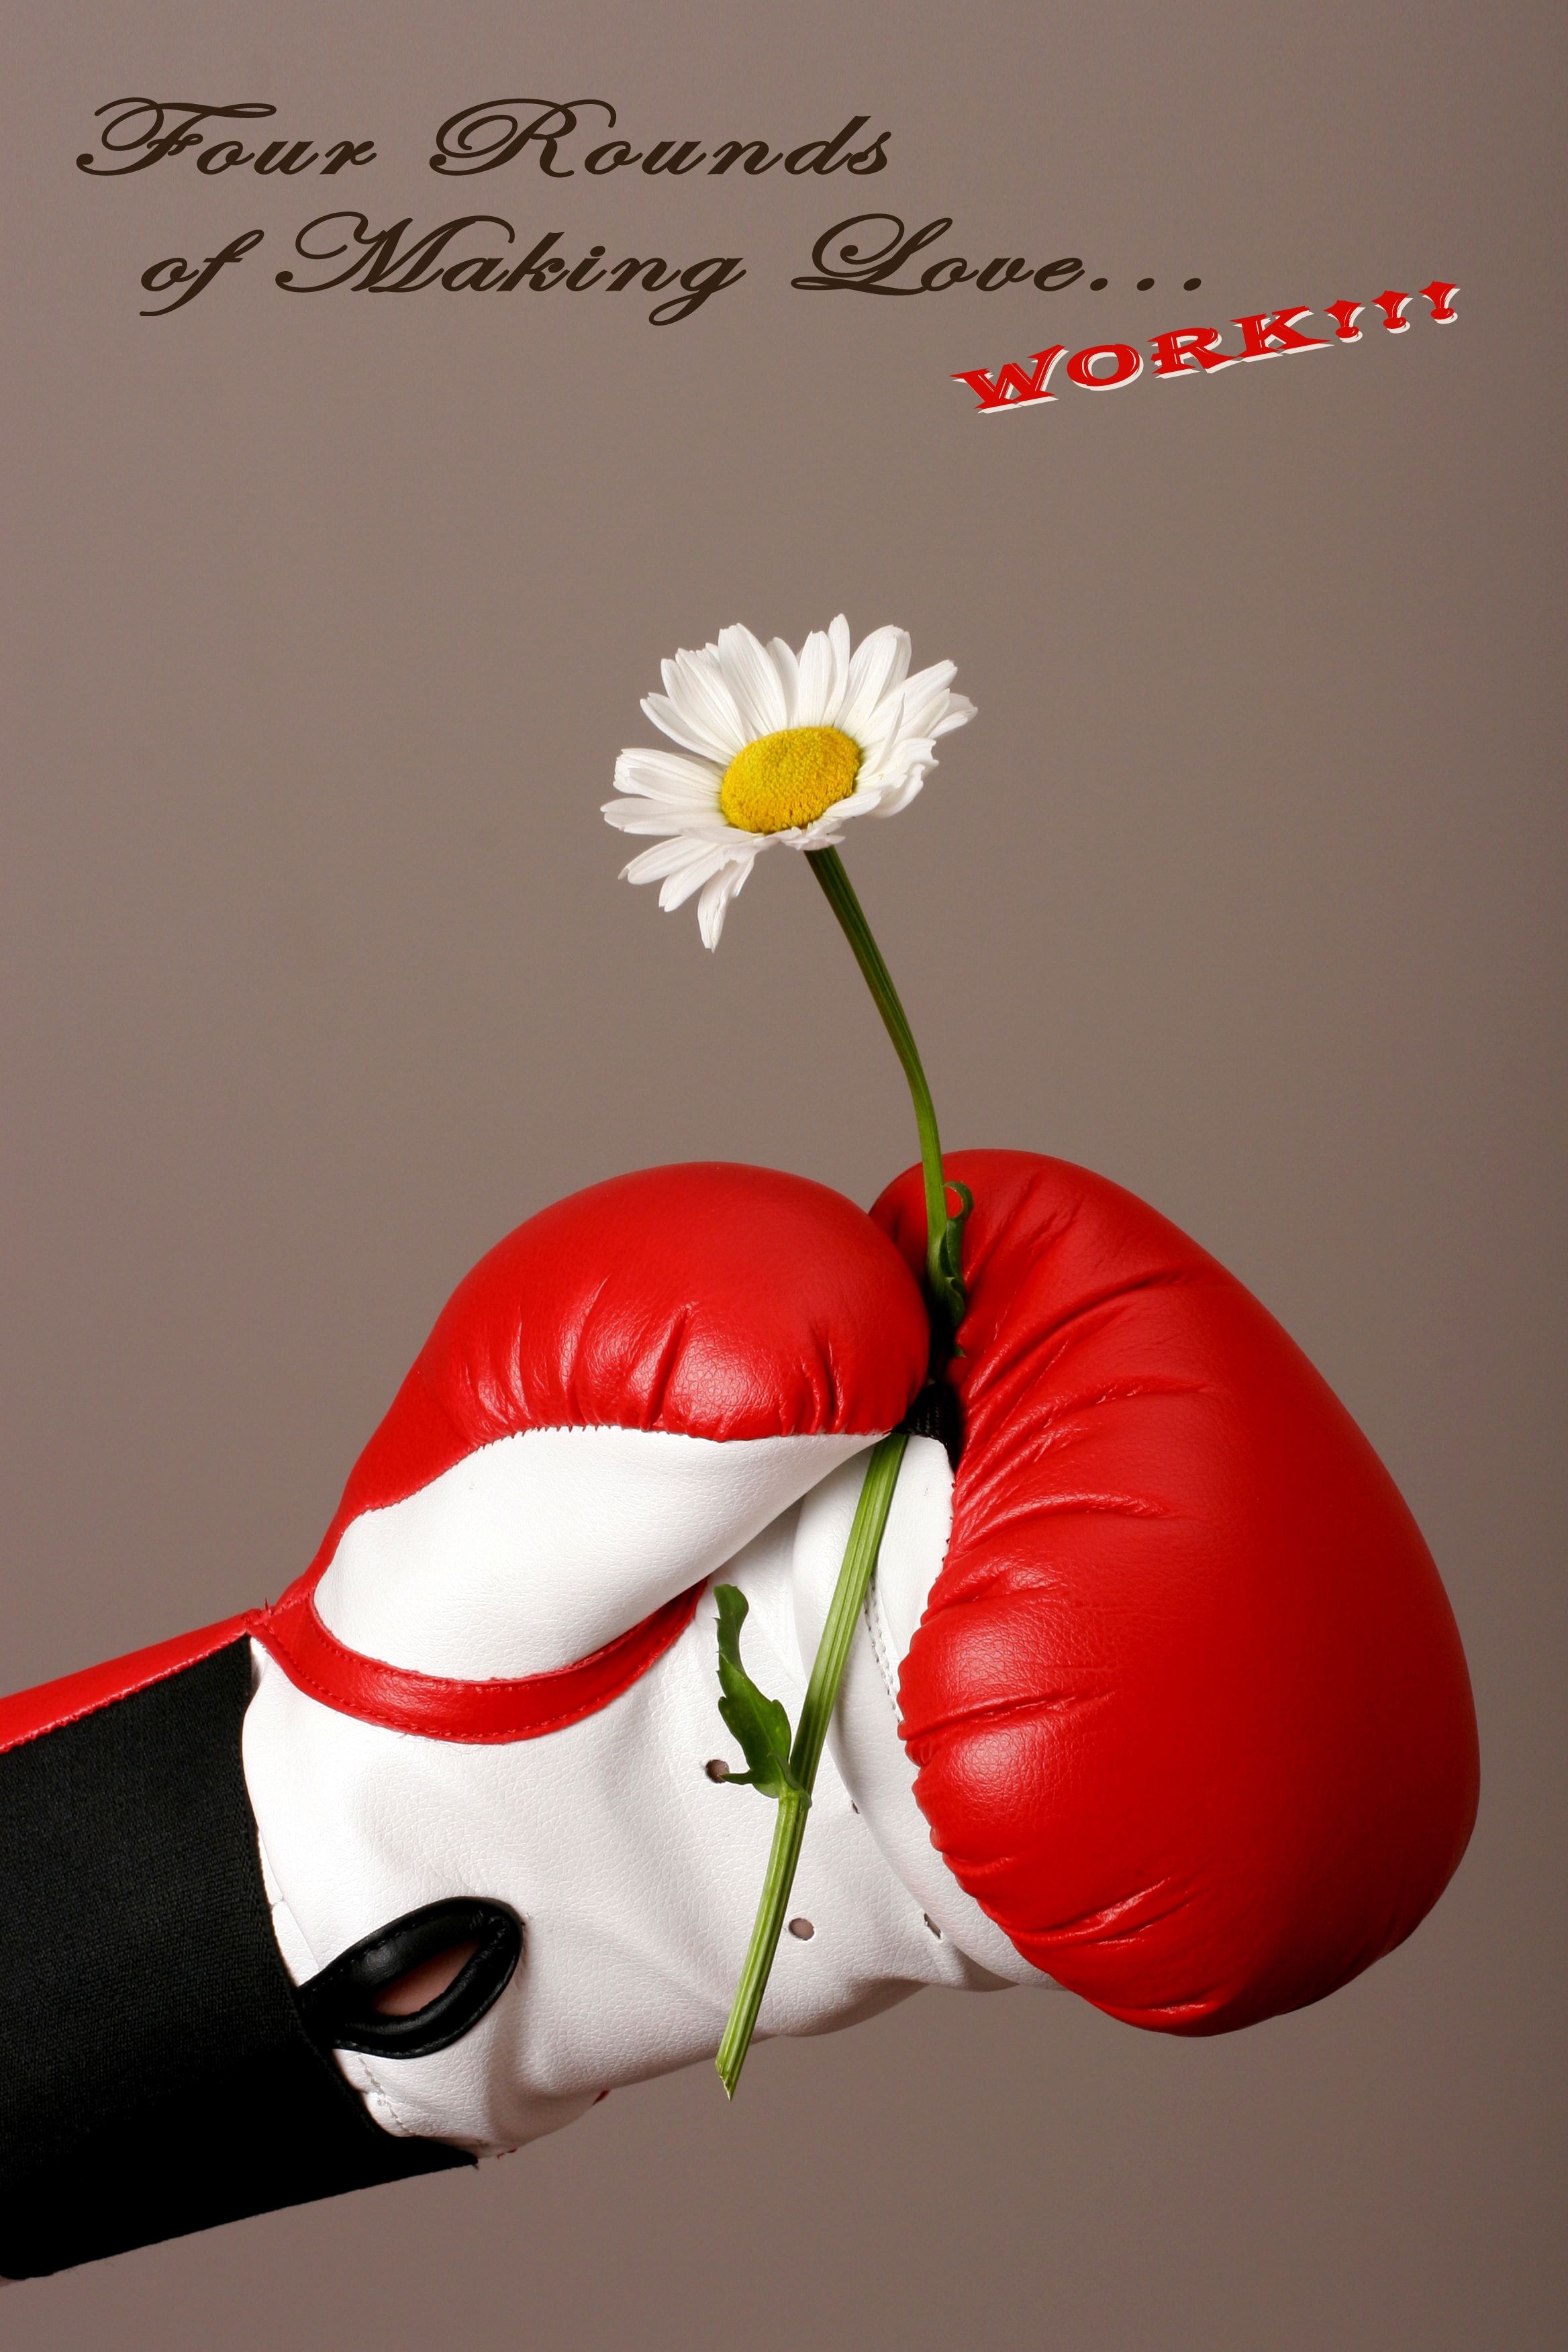 Boxing Glove and Daisy Title